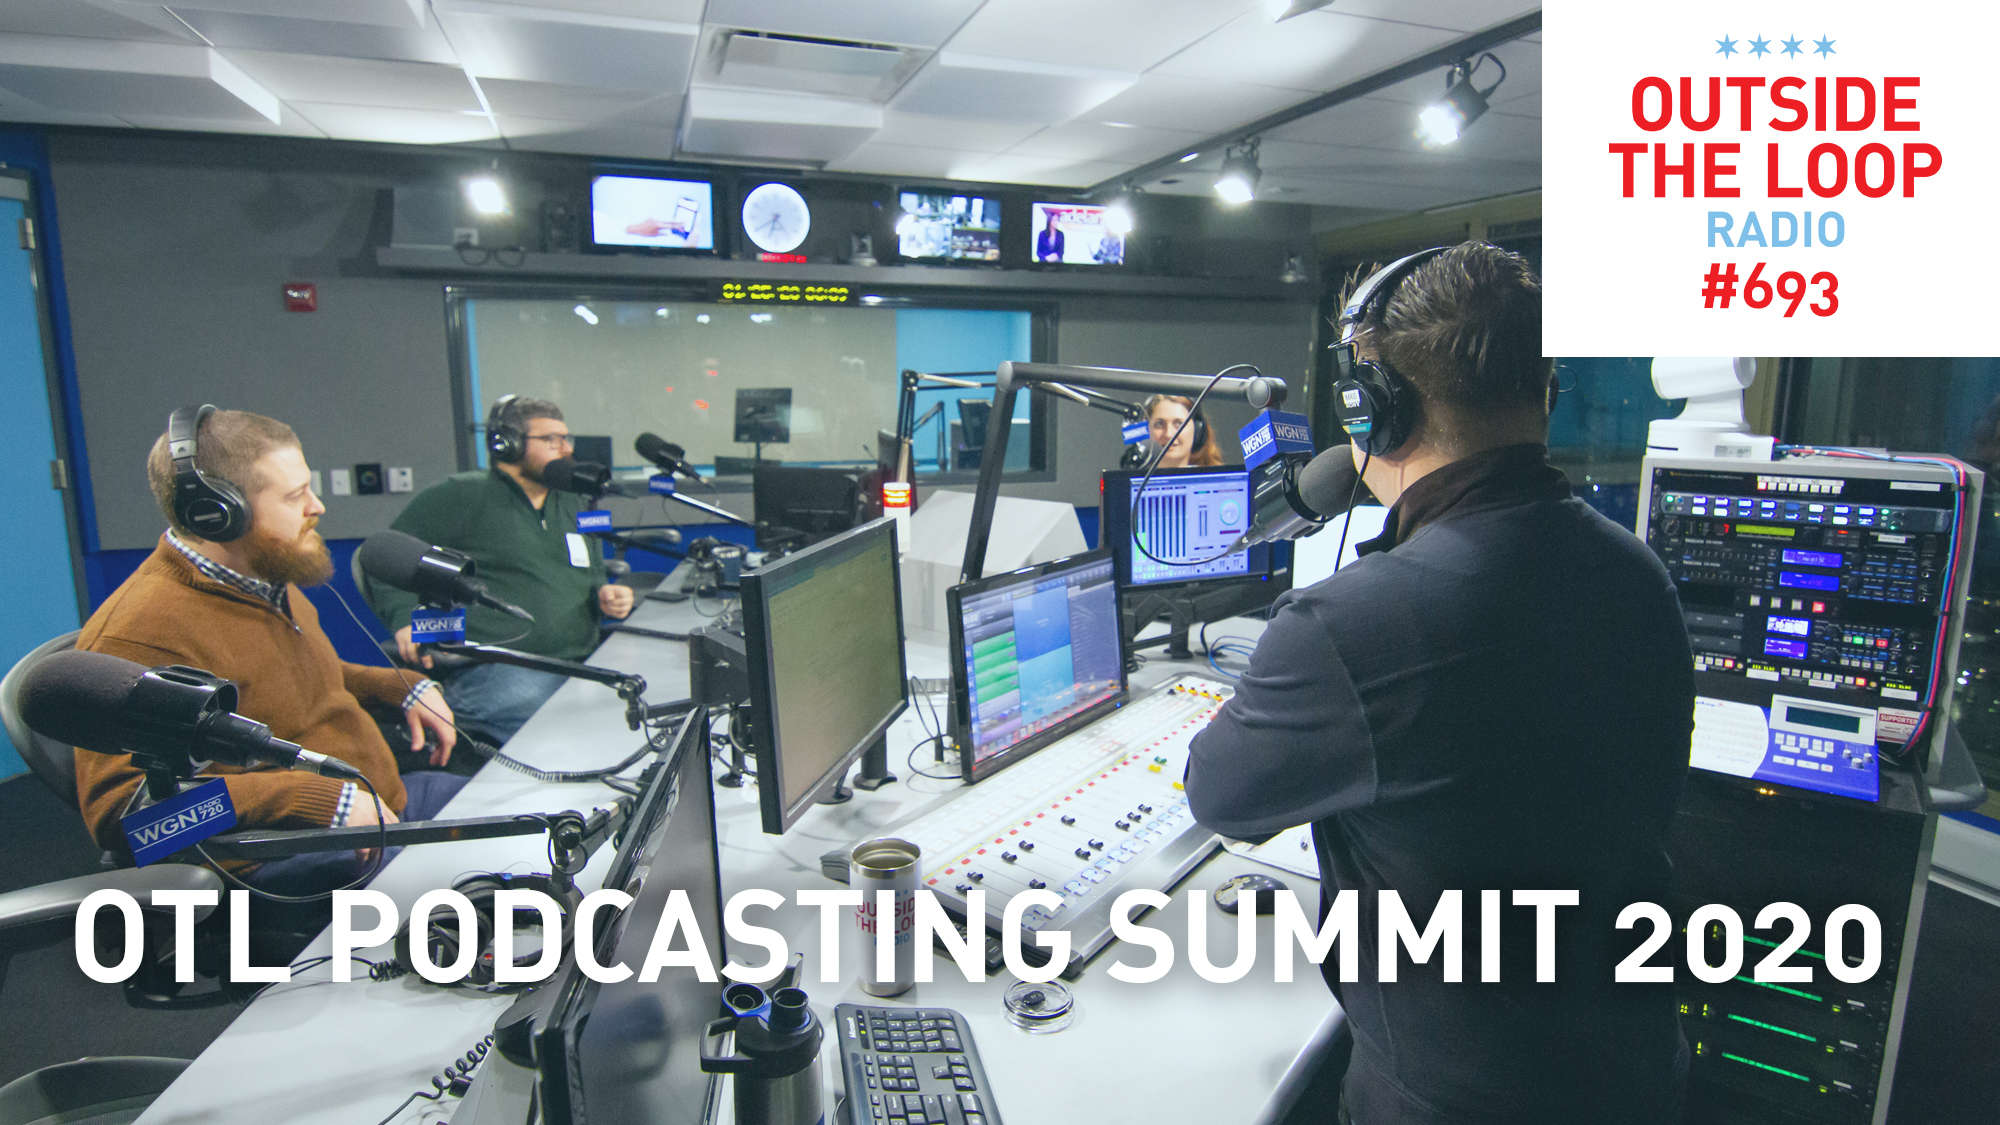 Mike Stephen hosts the OTL 2020 Podcasting Summit.